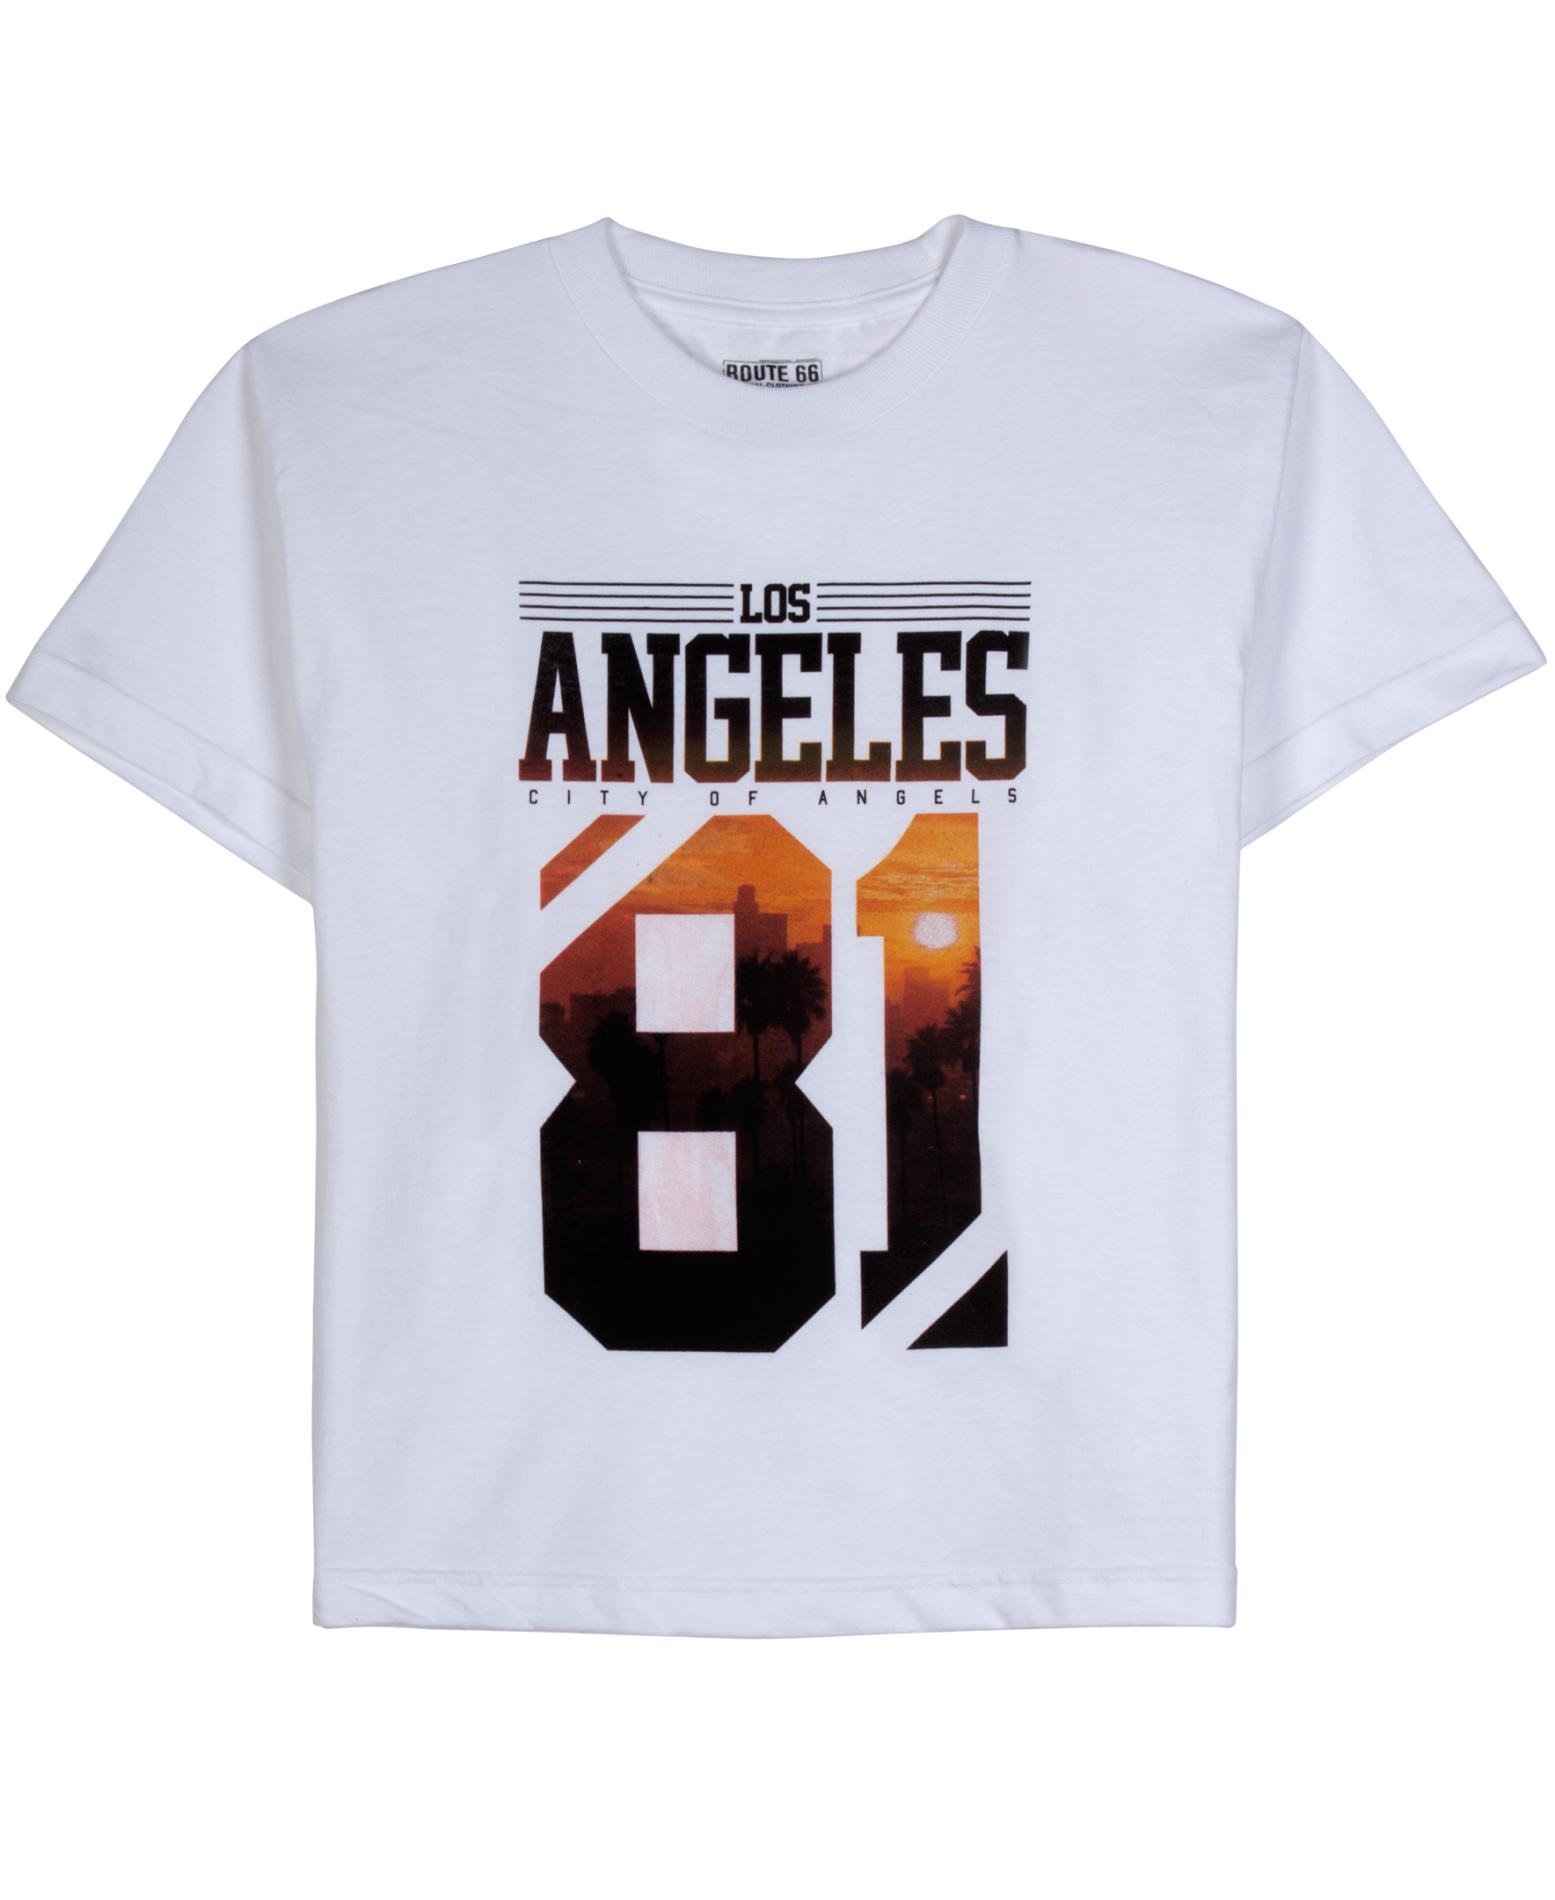 Route 66 Boy's Graphic T-Shirt - Los Angeles